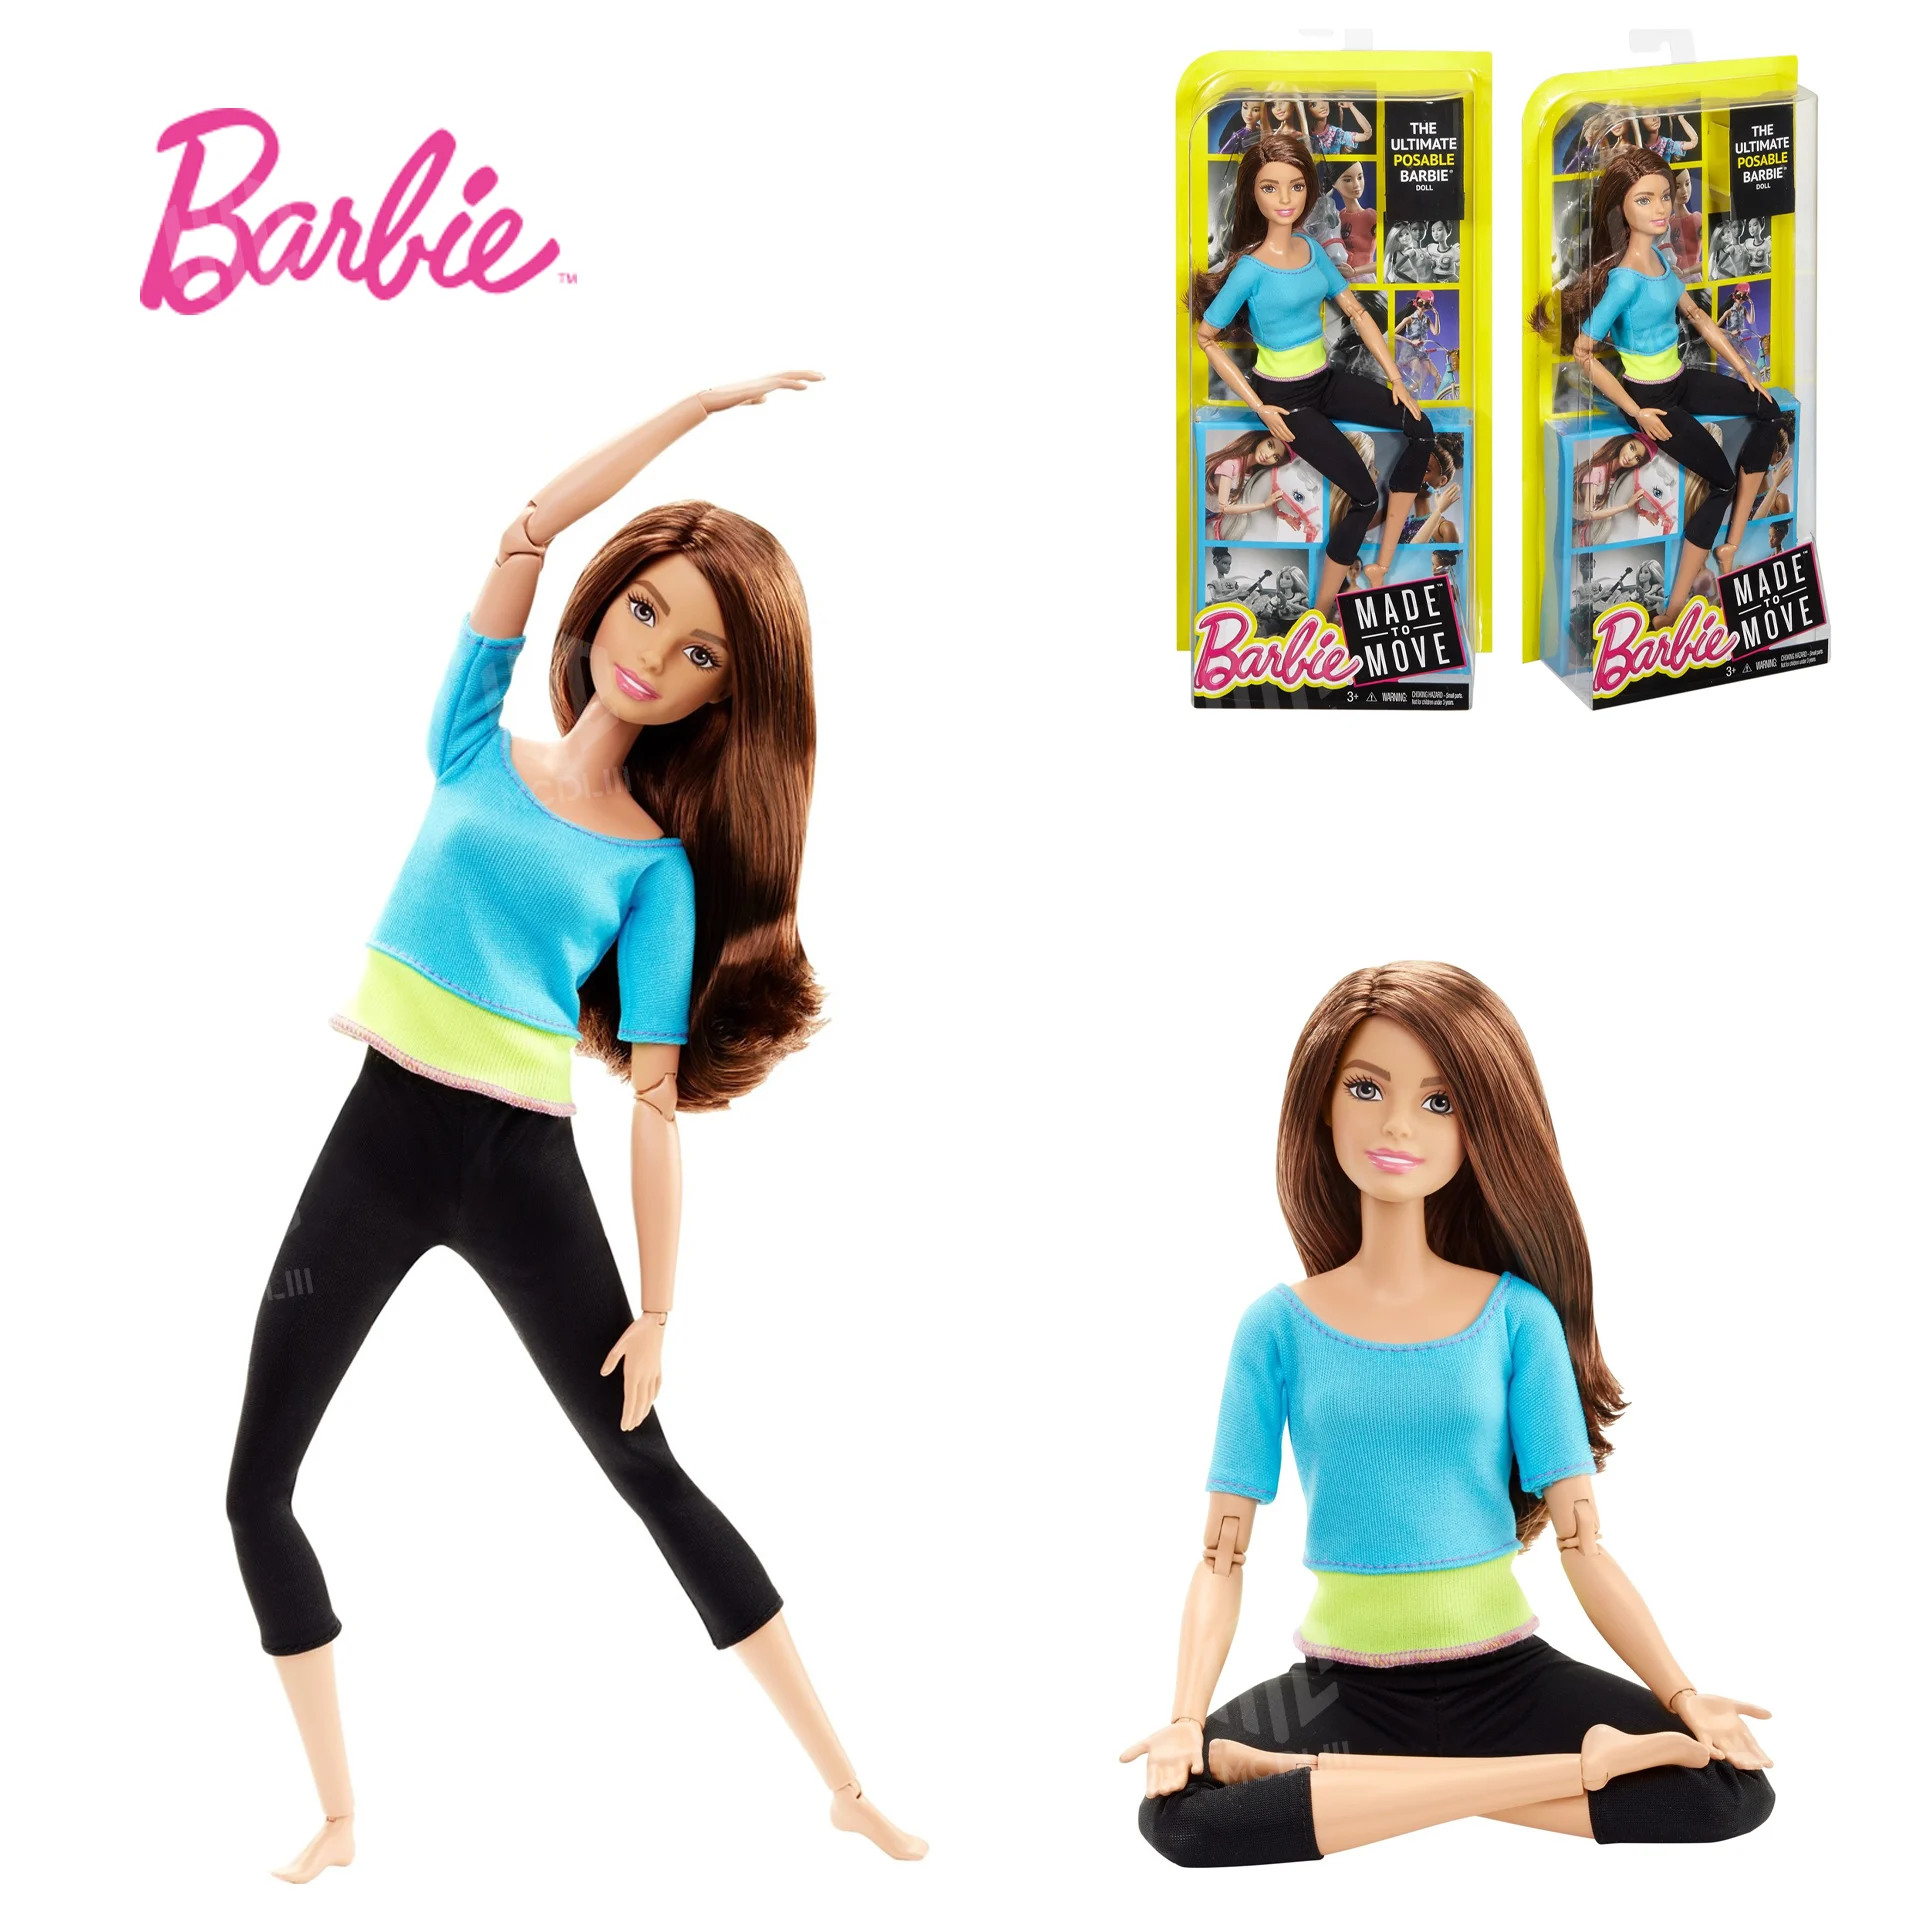 30cm Original Barbie Yoga Doll Multi Joints Made To Move Dance